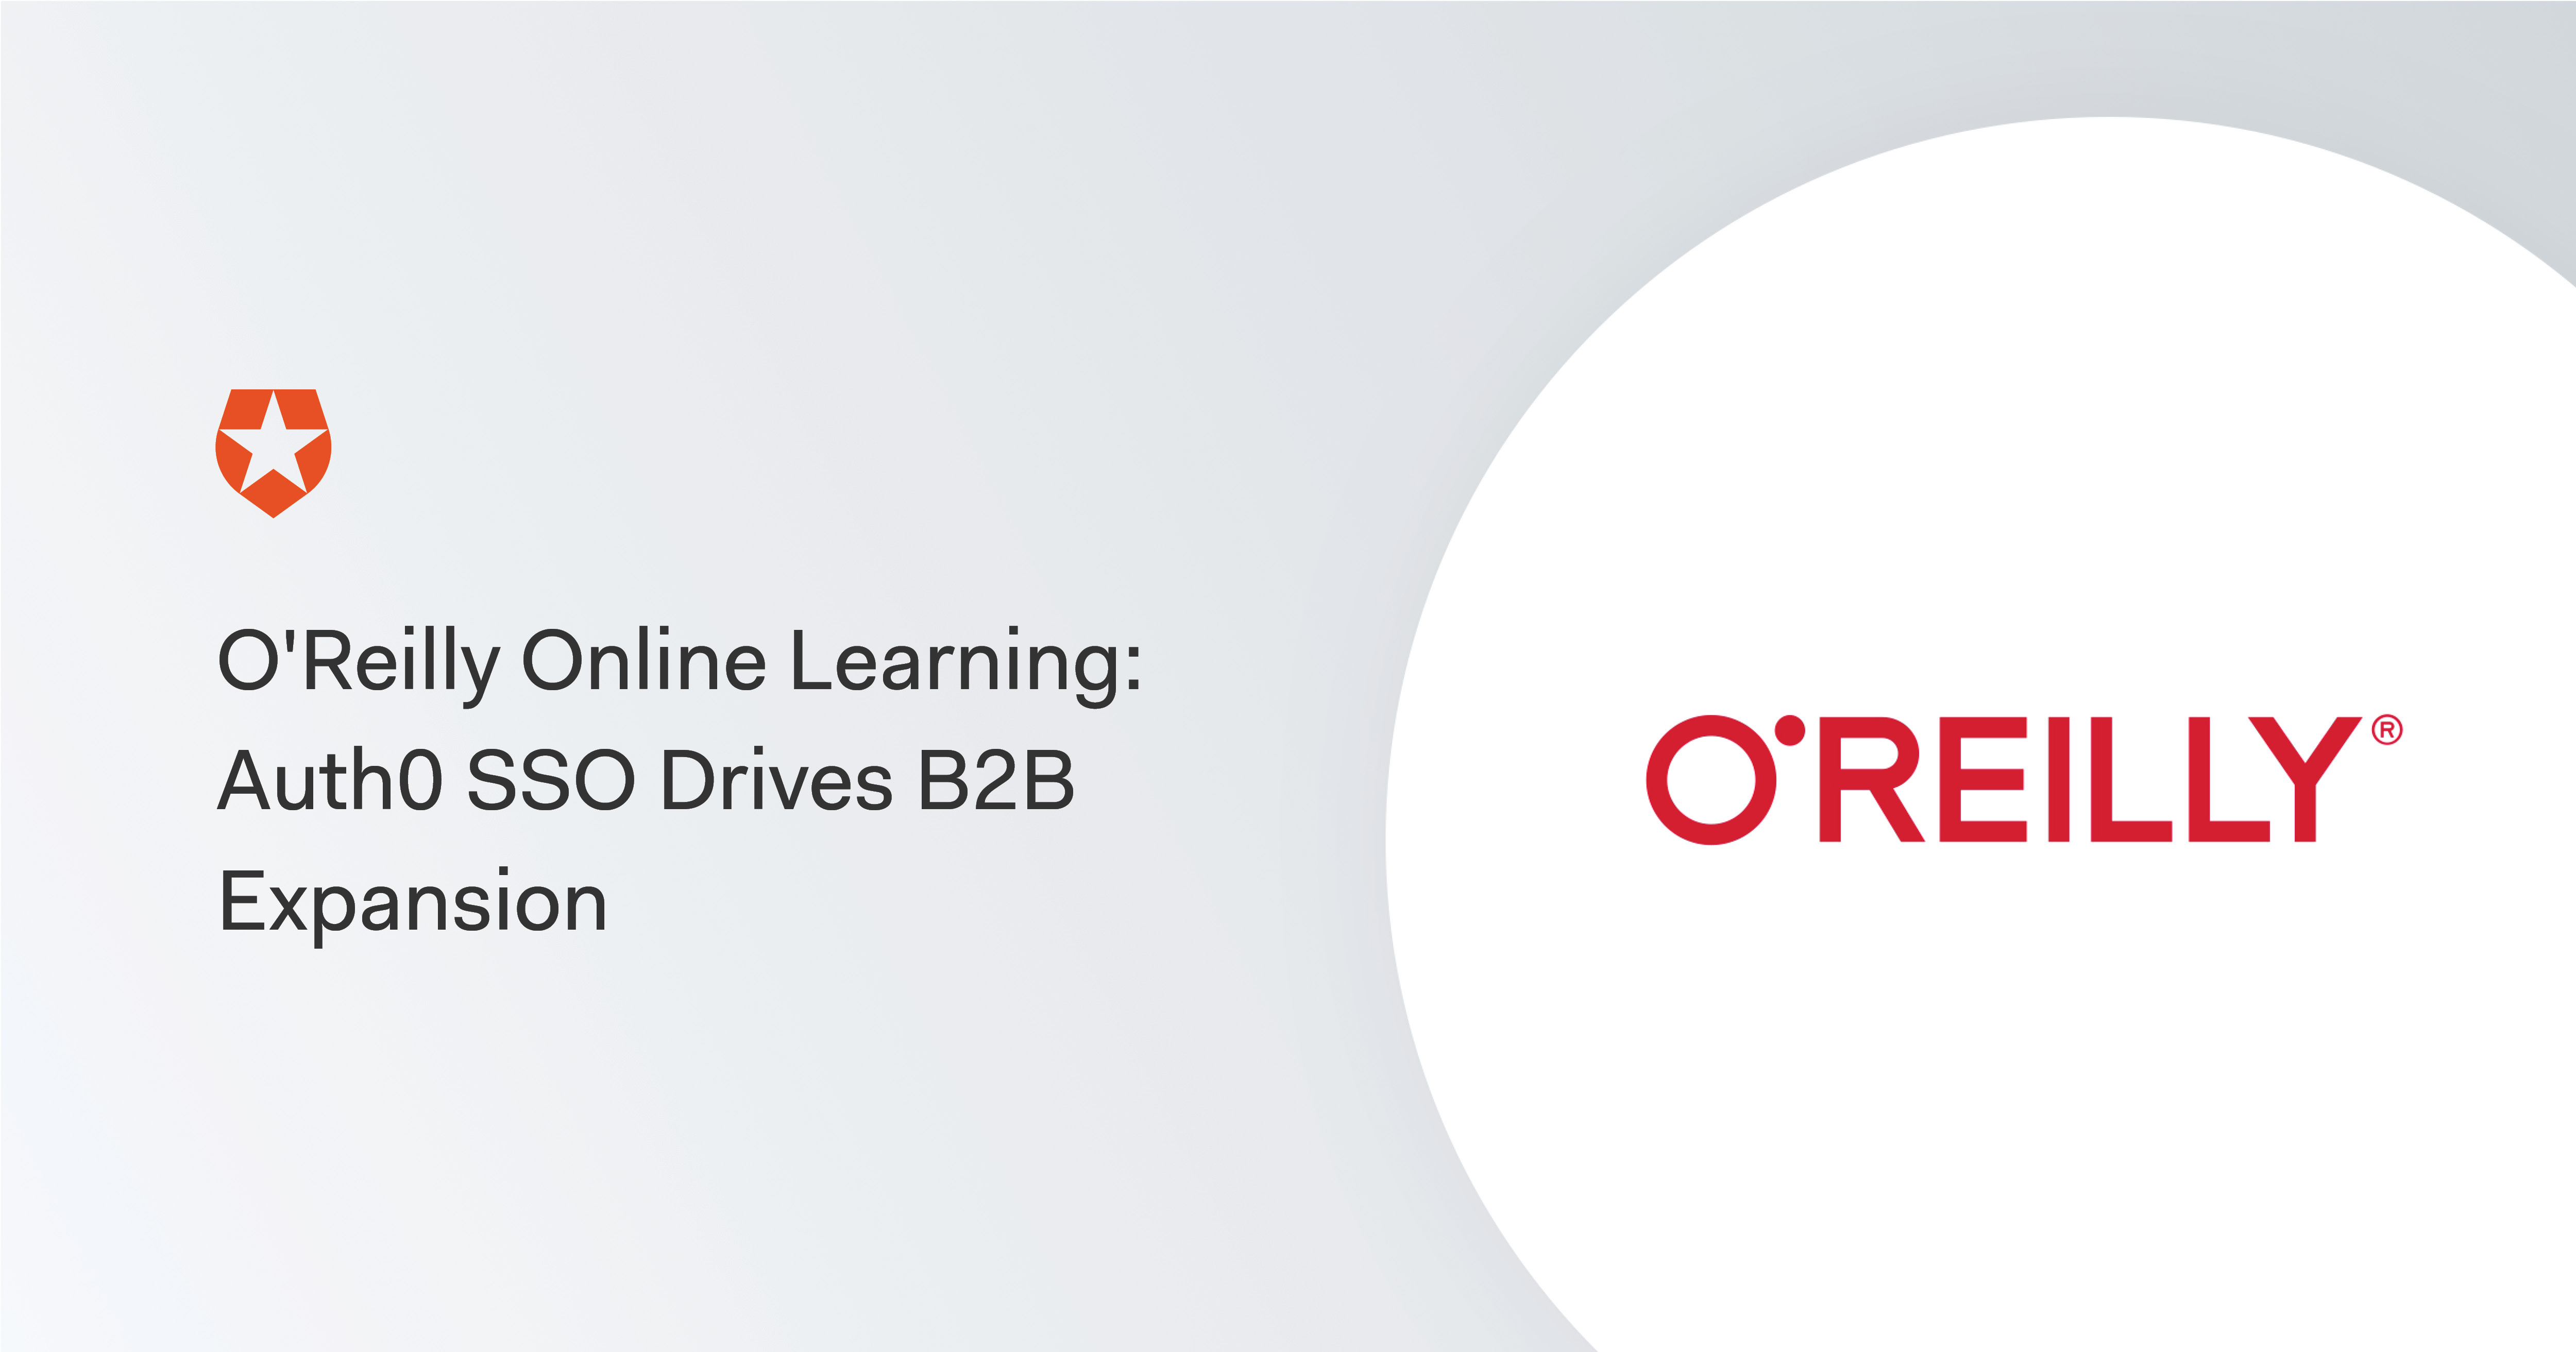 See How O Reilly Online Learning Uses Auth0 SSO To Drive B2B Expansion